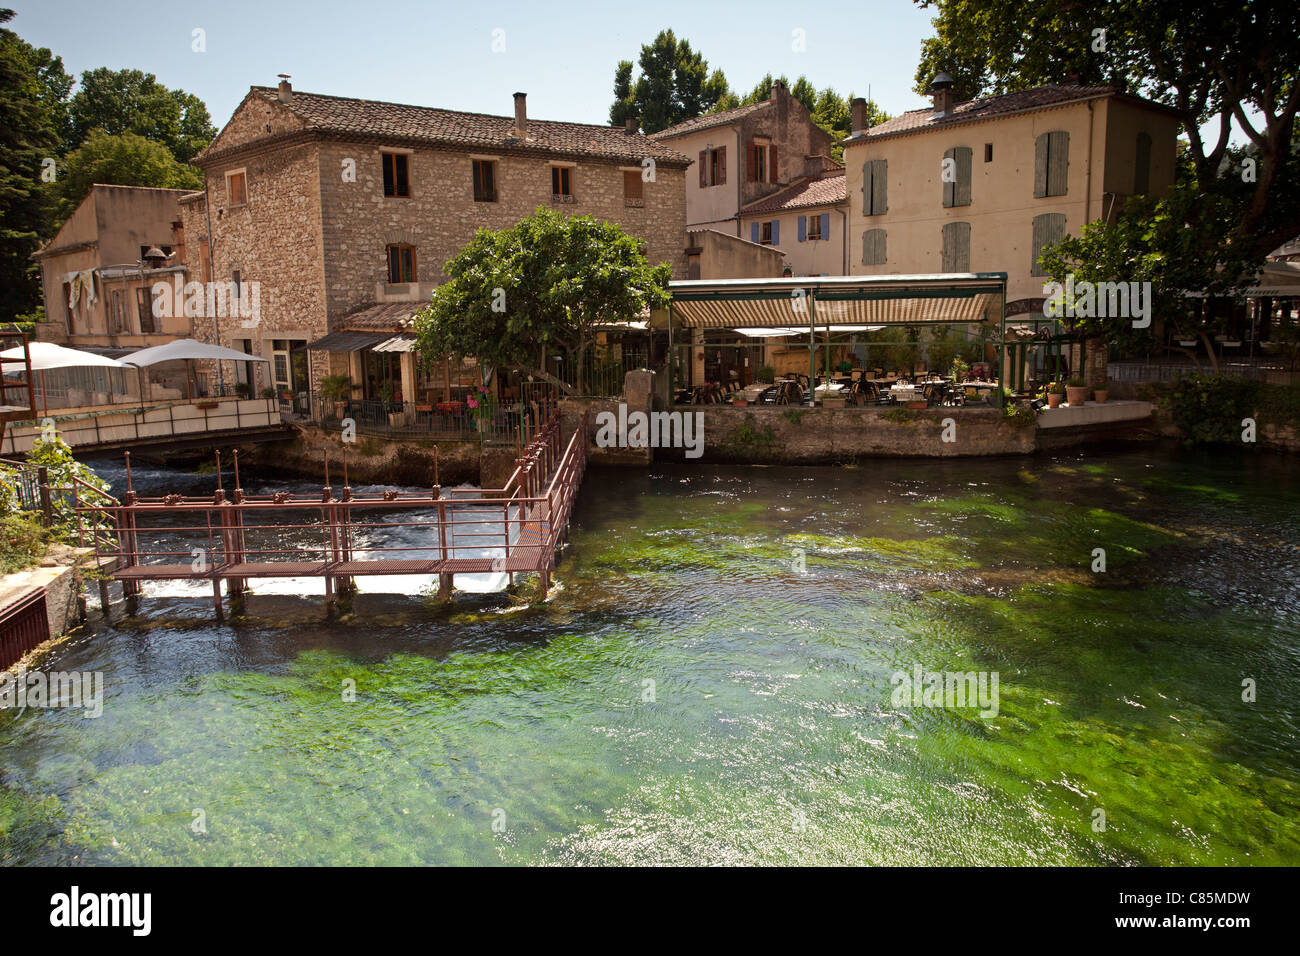 Fontaine-de-Vaucluse: Spring's Green Waters Stock Photo